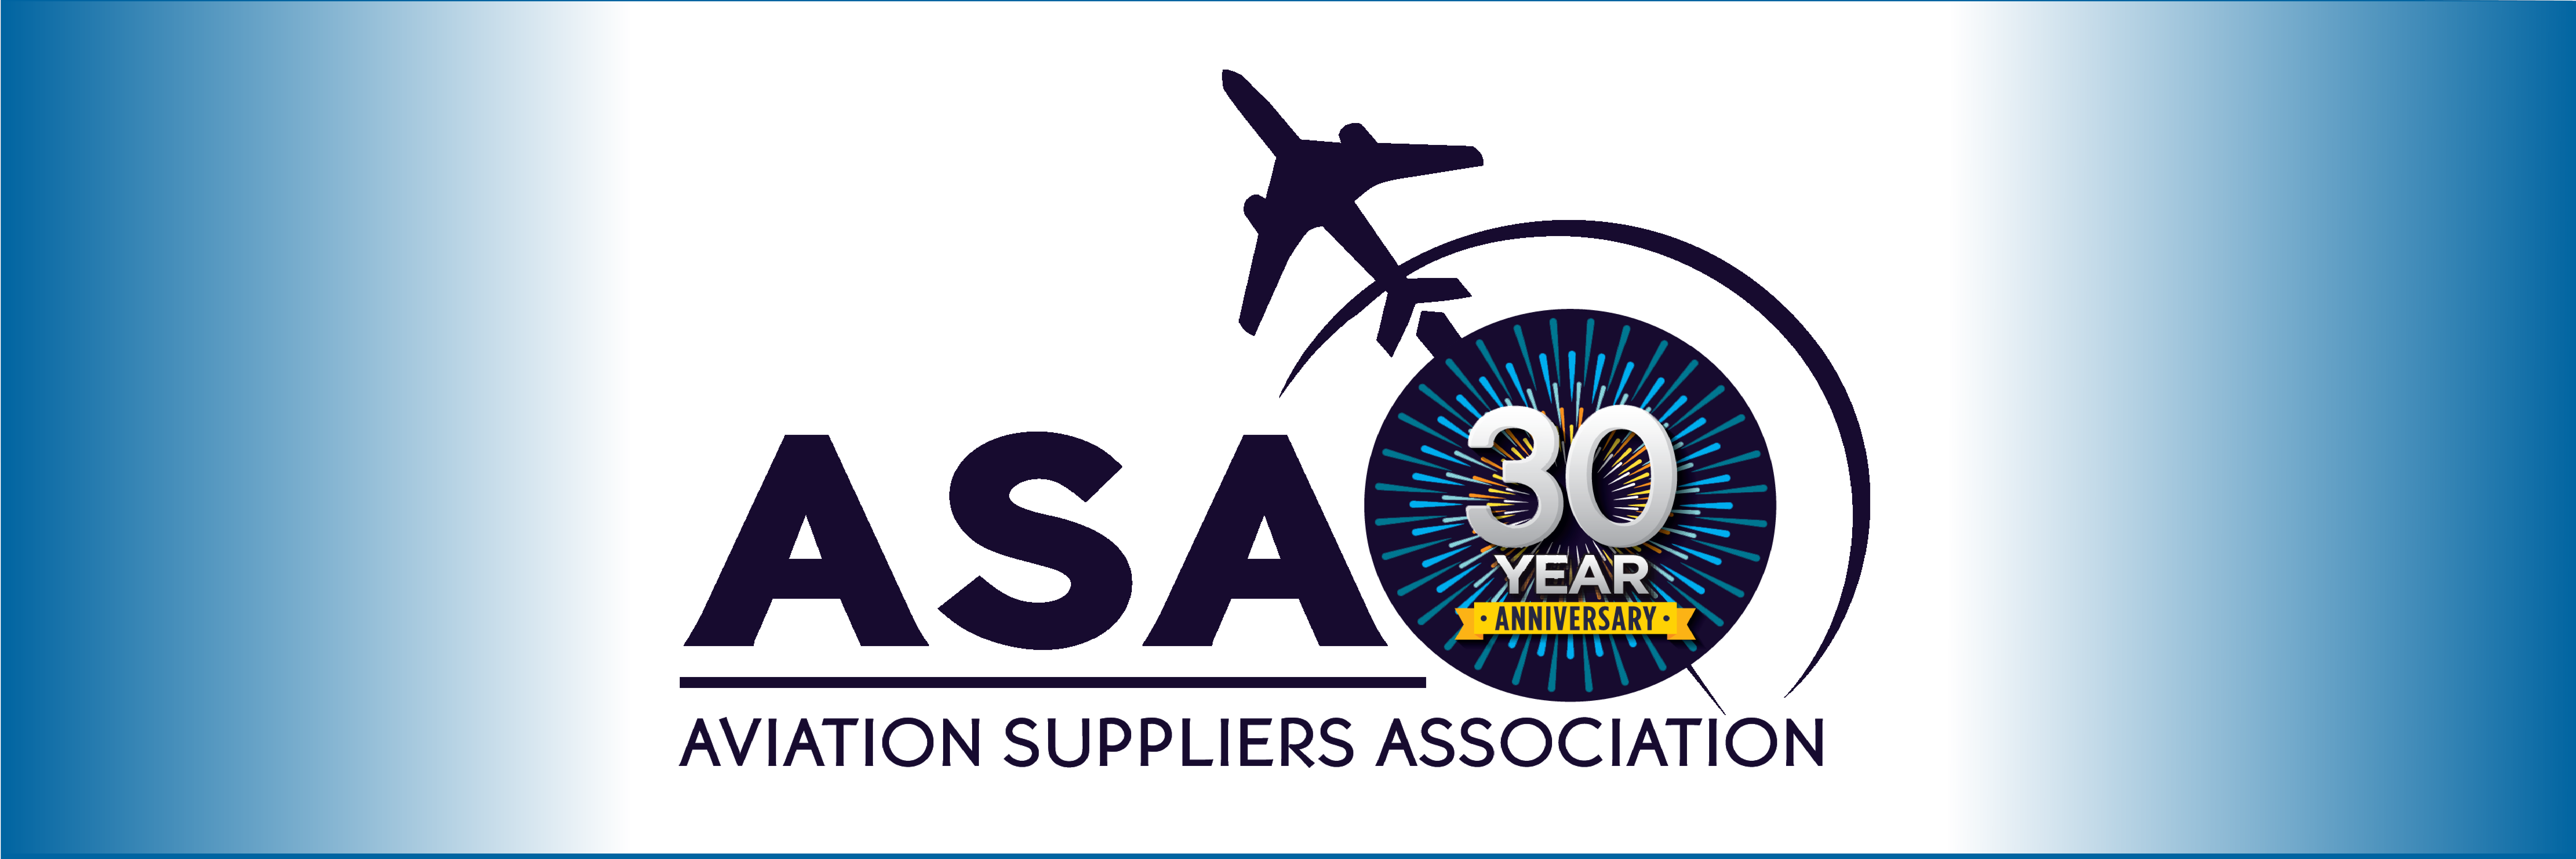 https://www.aviationsuppliers.org/asa/files/dbcarousel/image2/000000000005/30th%20Anniversary%20Slider.png